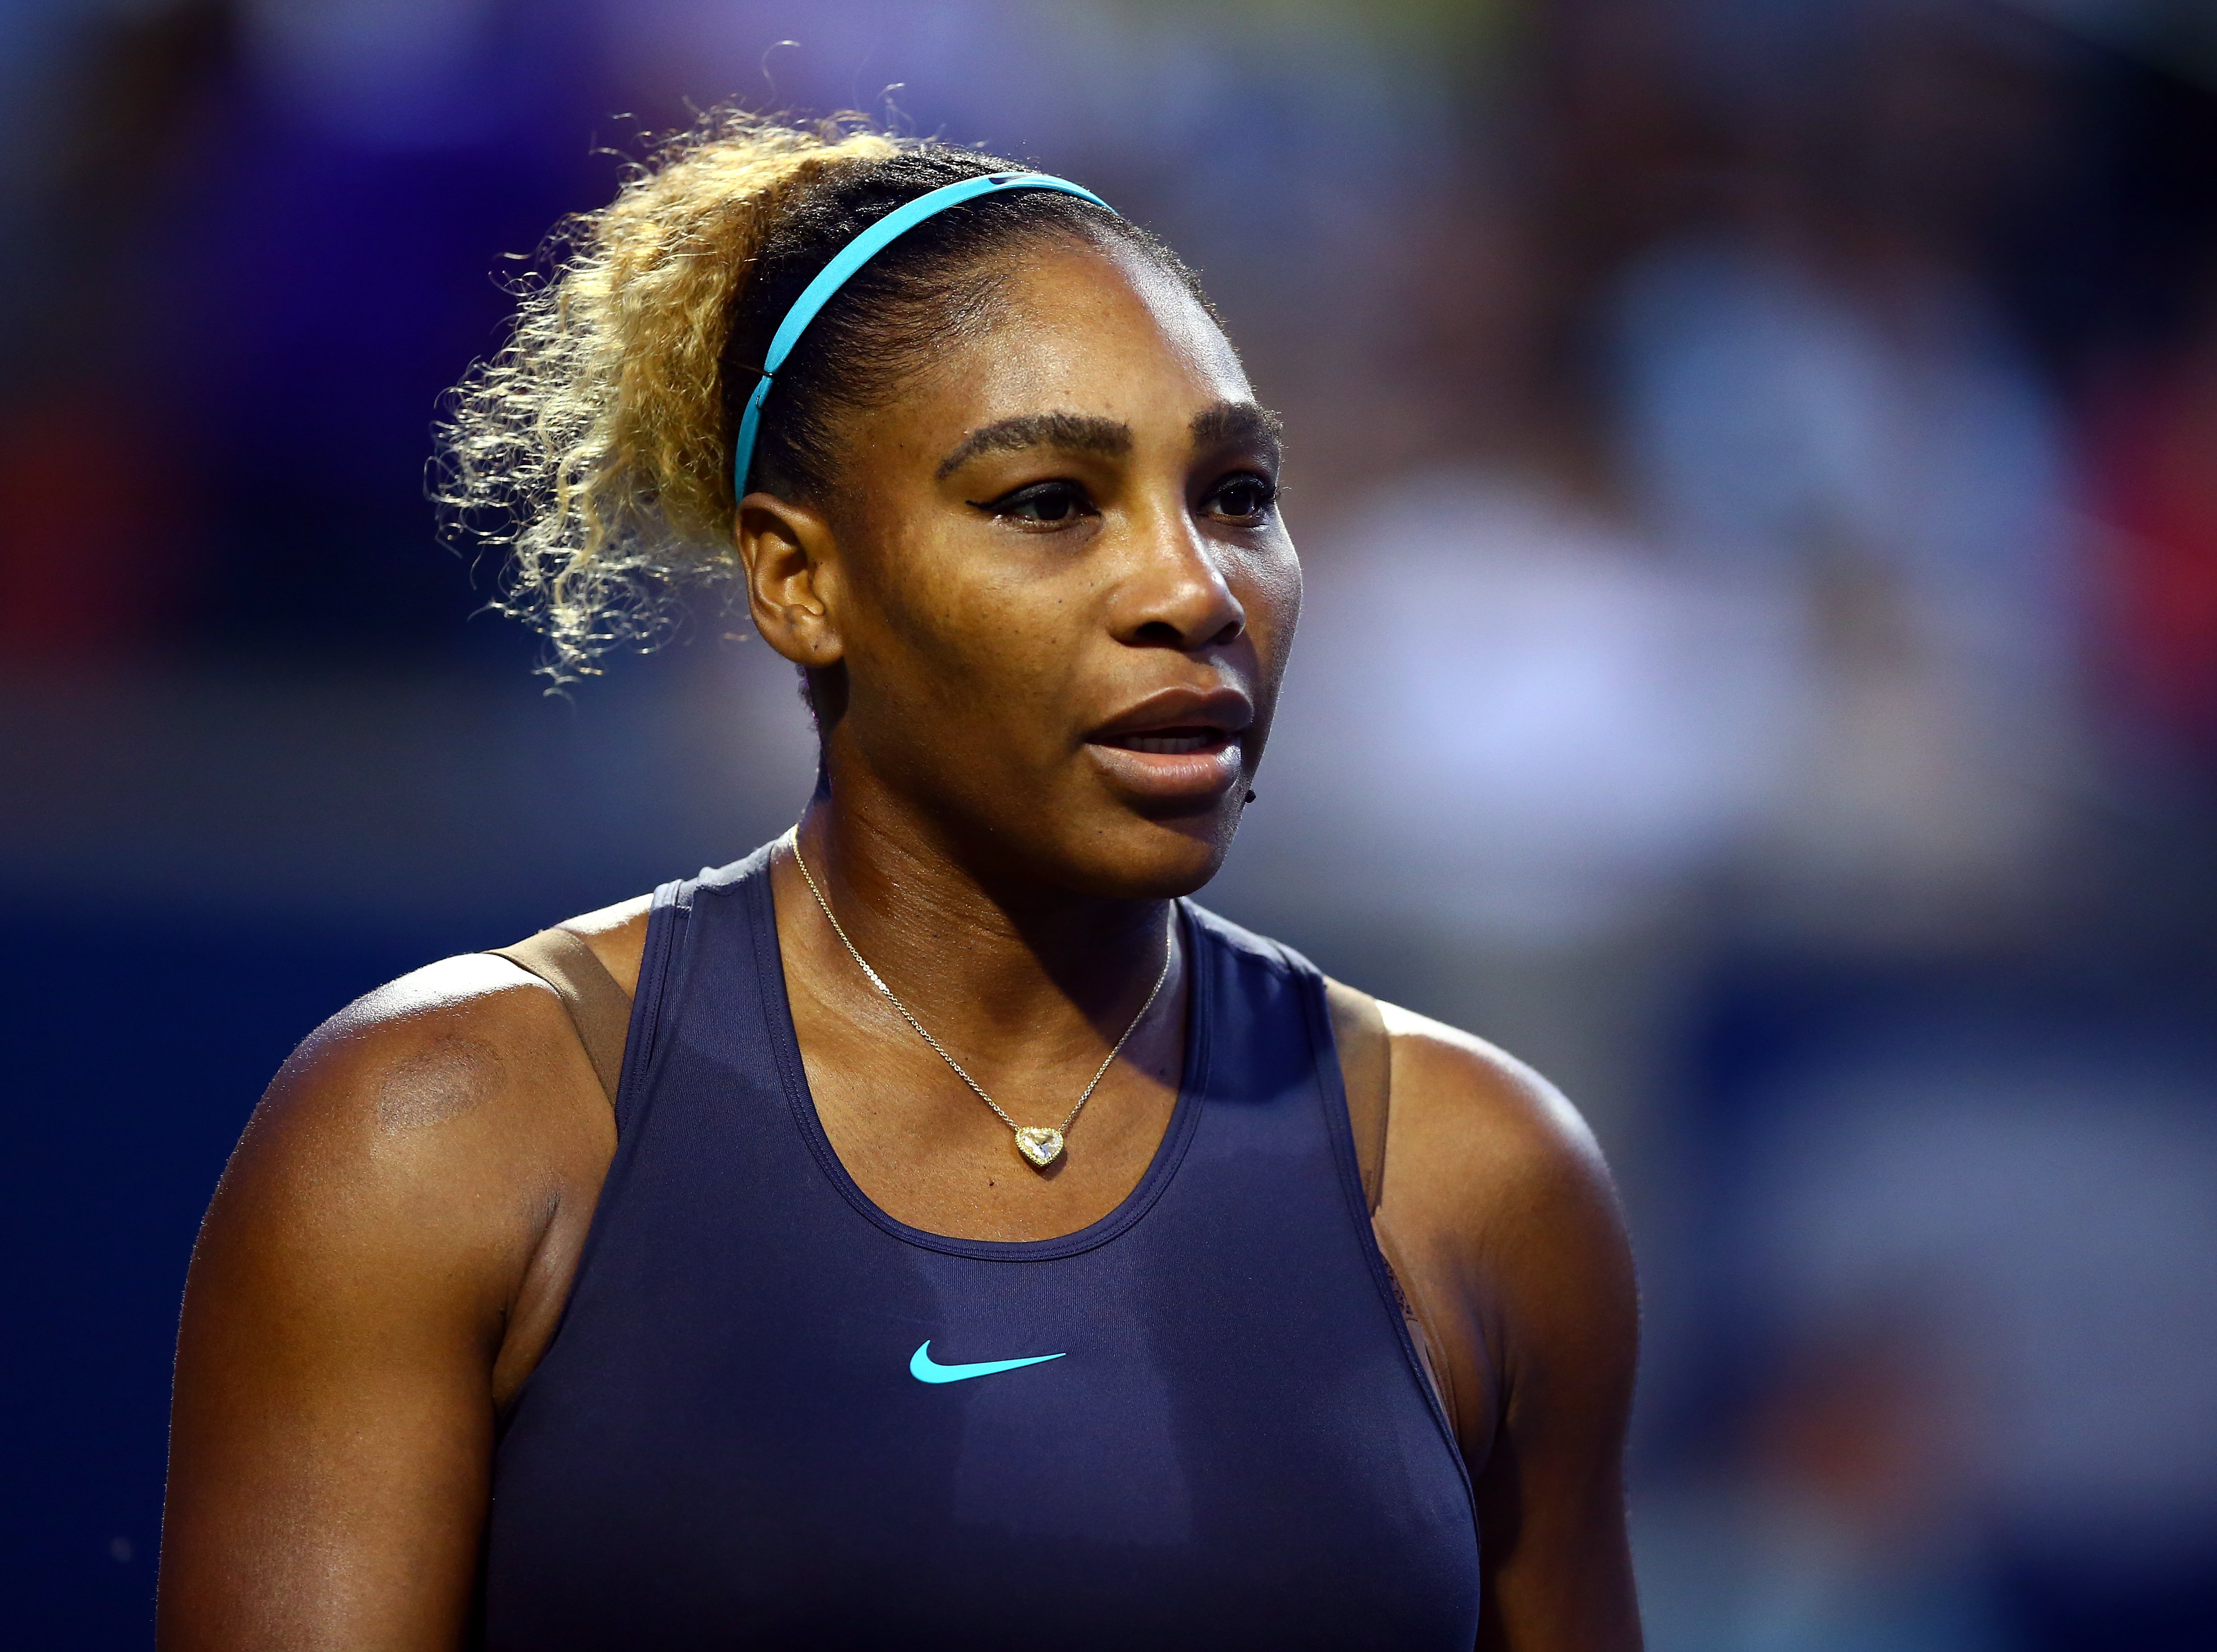 Serena Williams on Day 9 of the Rogers Cup at Aviva Centre on August 11, 2019. | Photo: GettyImages